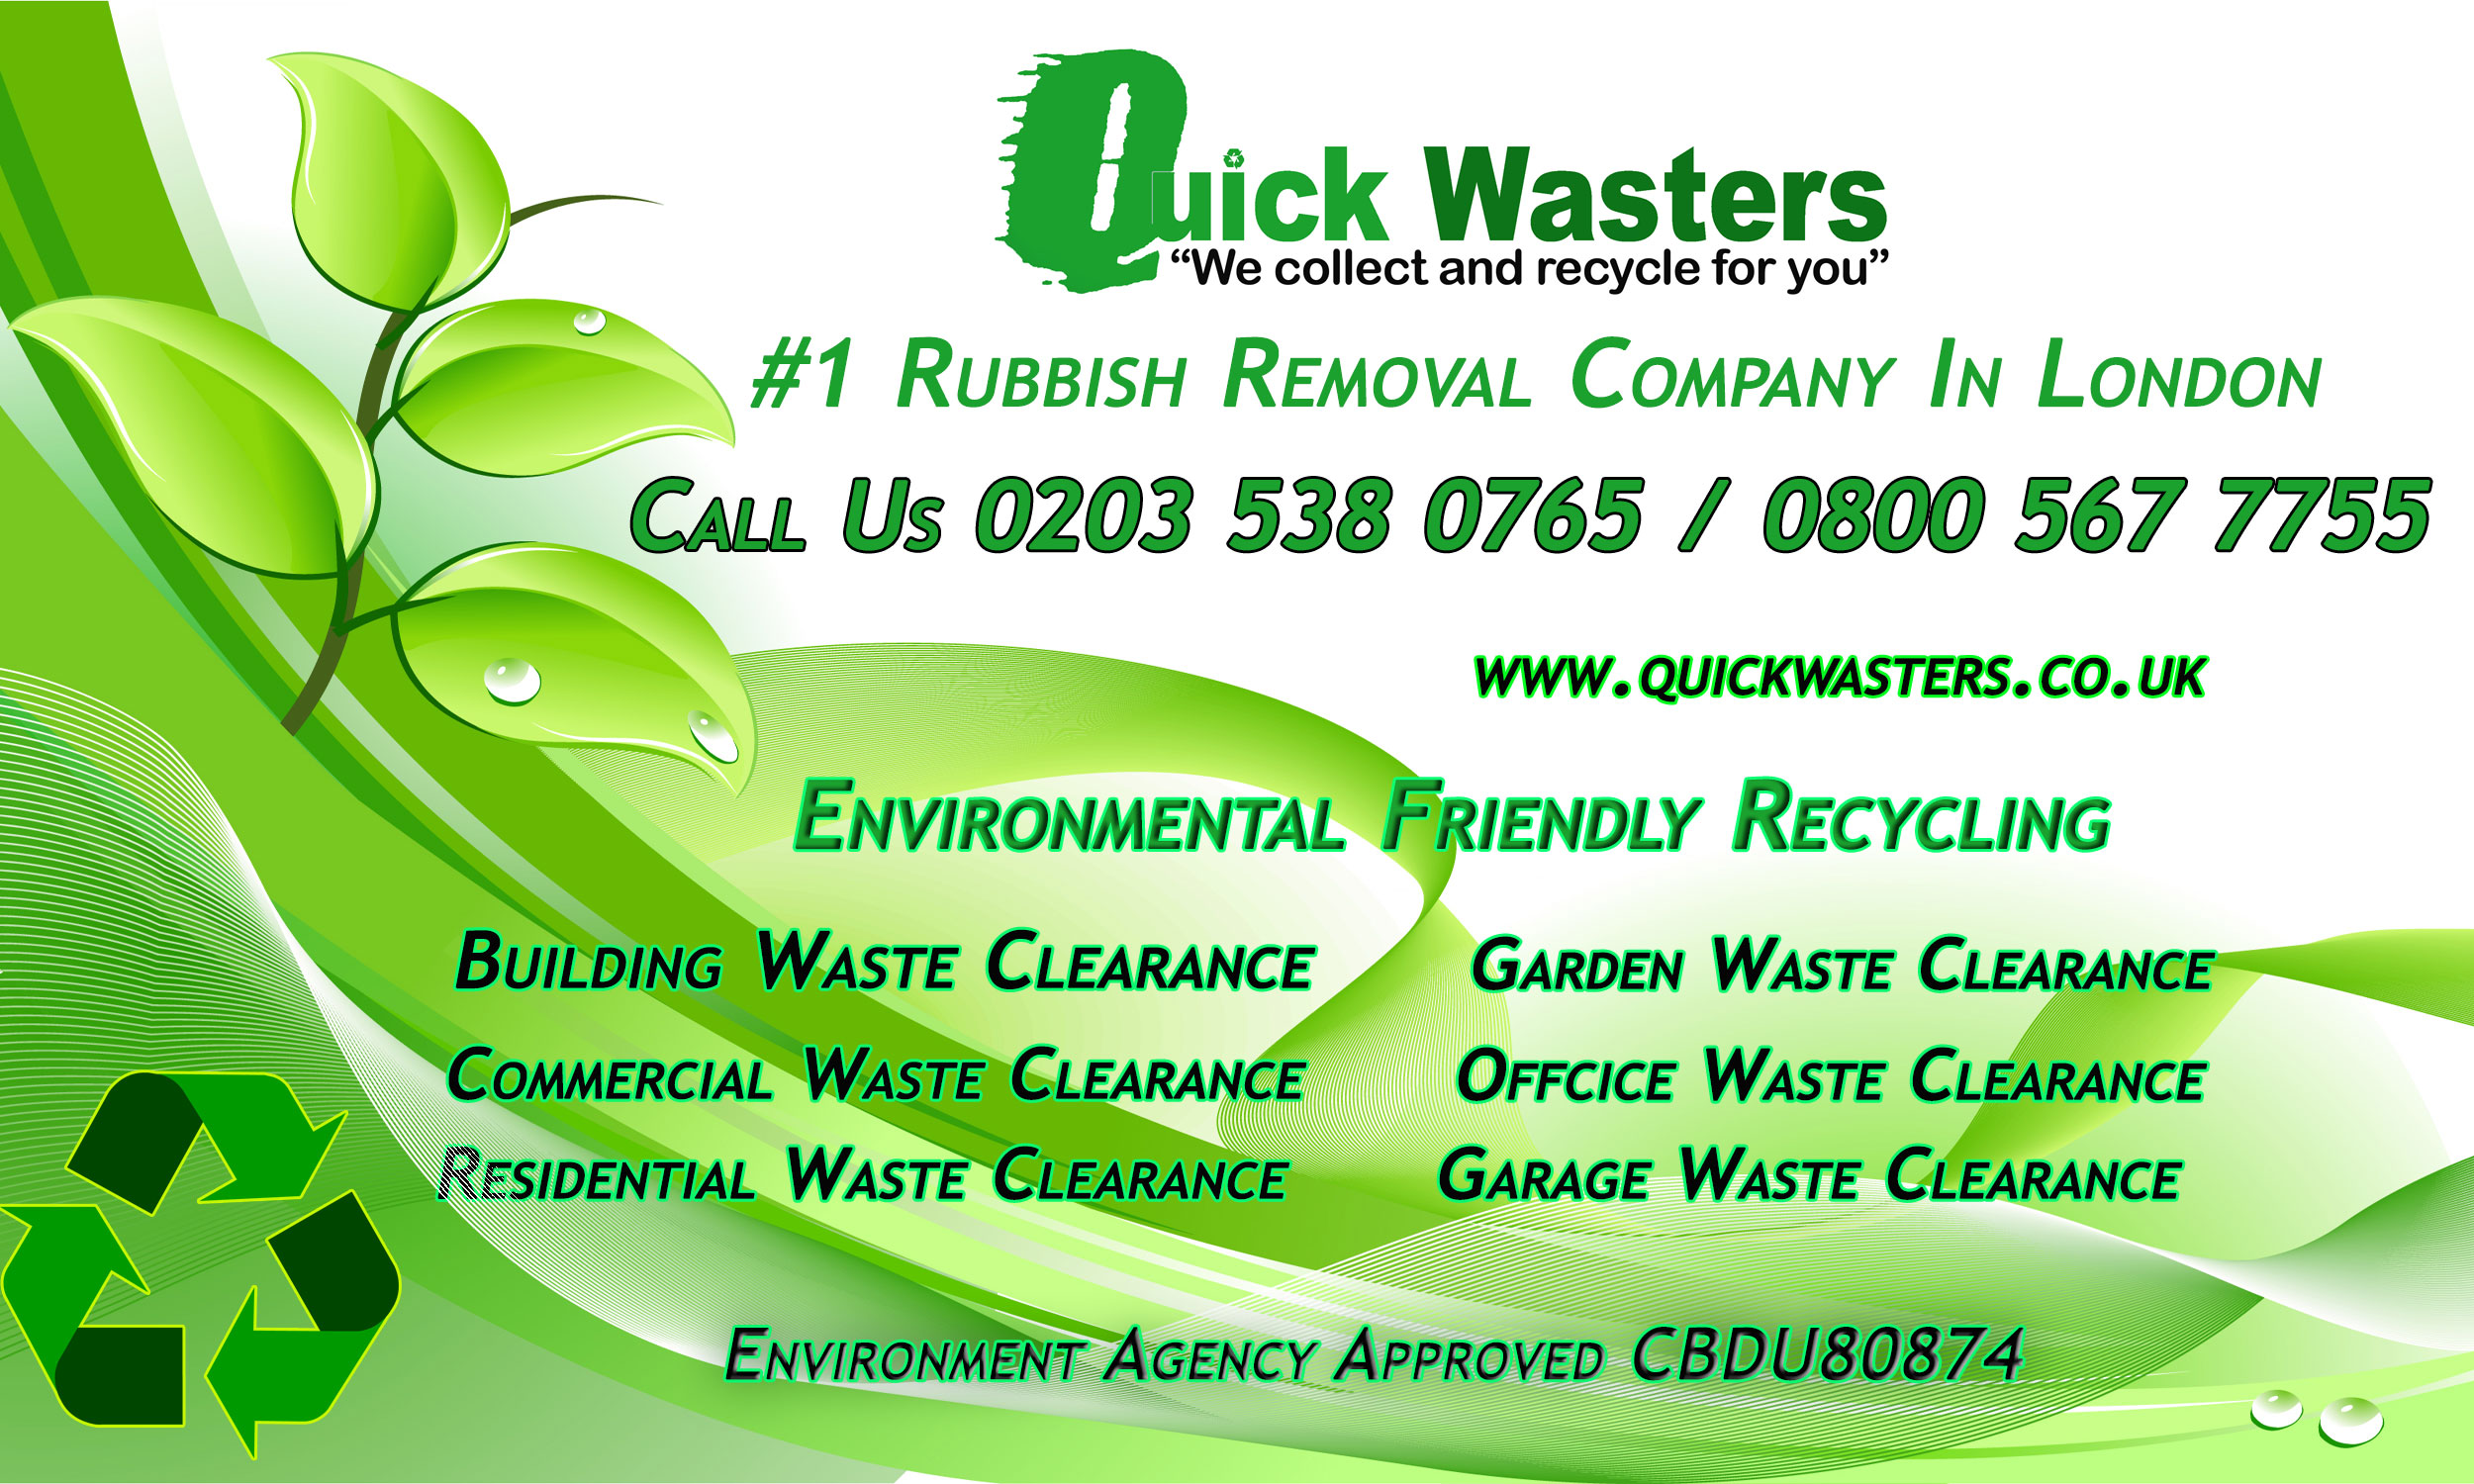 Quickwasters - Rubbish Removal London